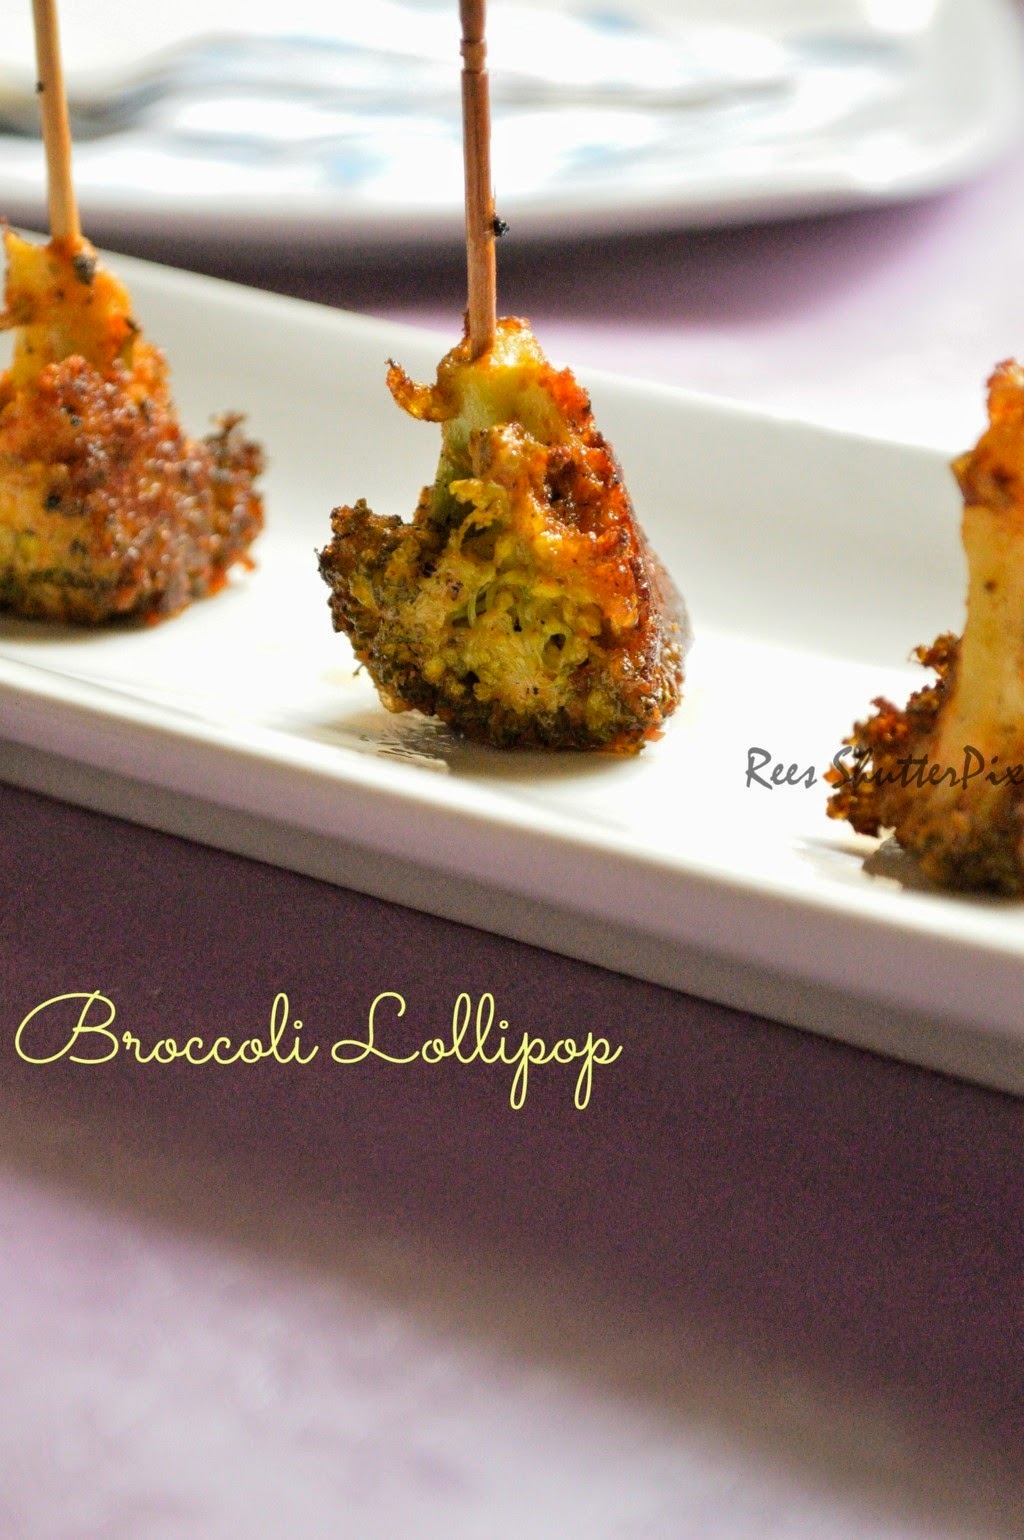  easy broccoli fry recipe, step by step picture recipe broccoli fry or 65, broccoli lollipop recipe, broccoli recipes, restaurant style broccoli recipe